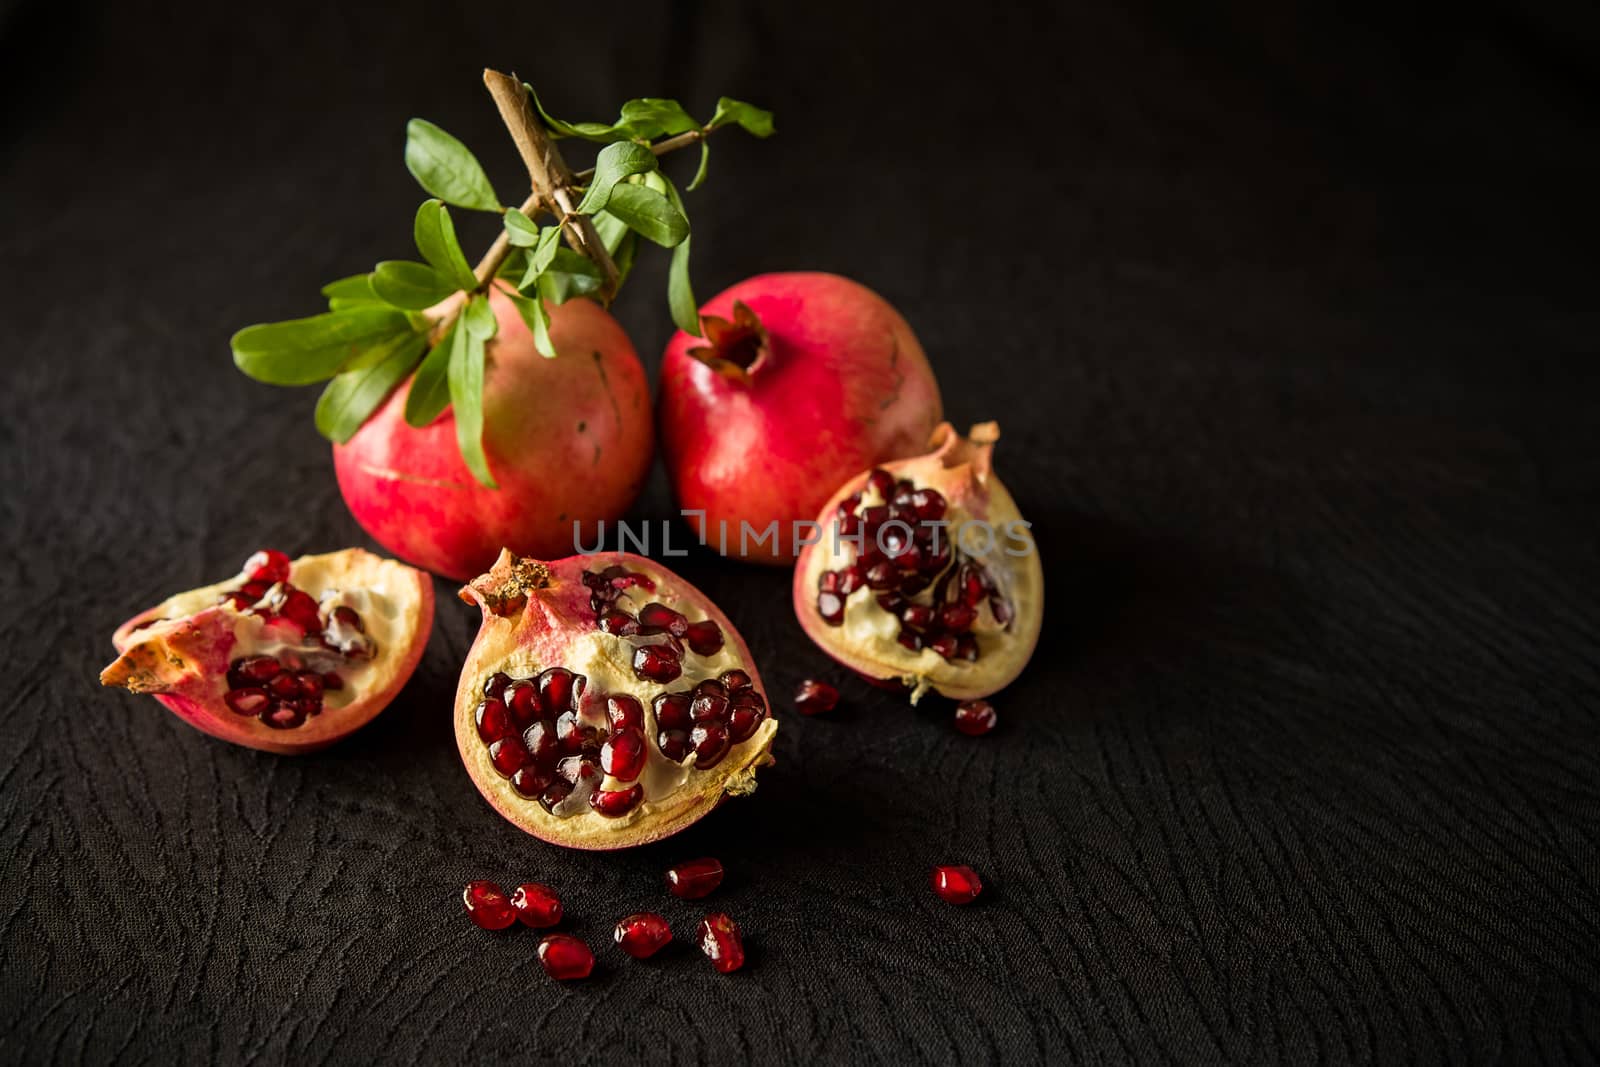 Pomegranate fruits and seeds by LuigiMorbidelli